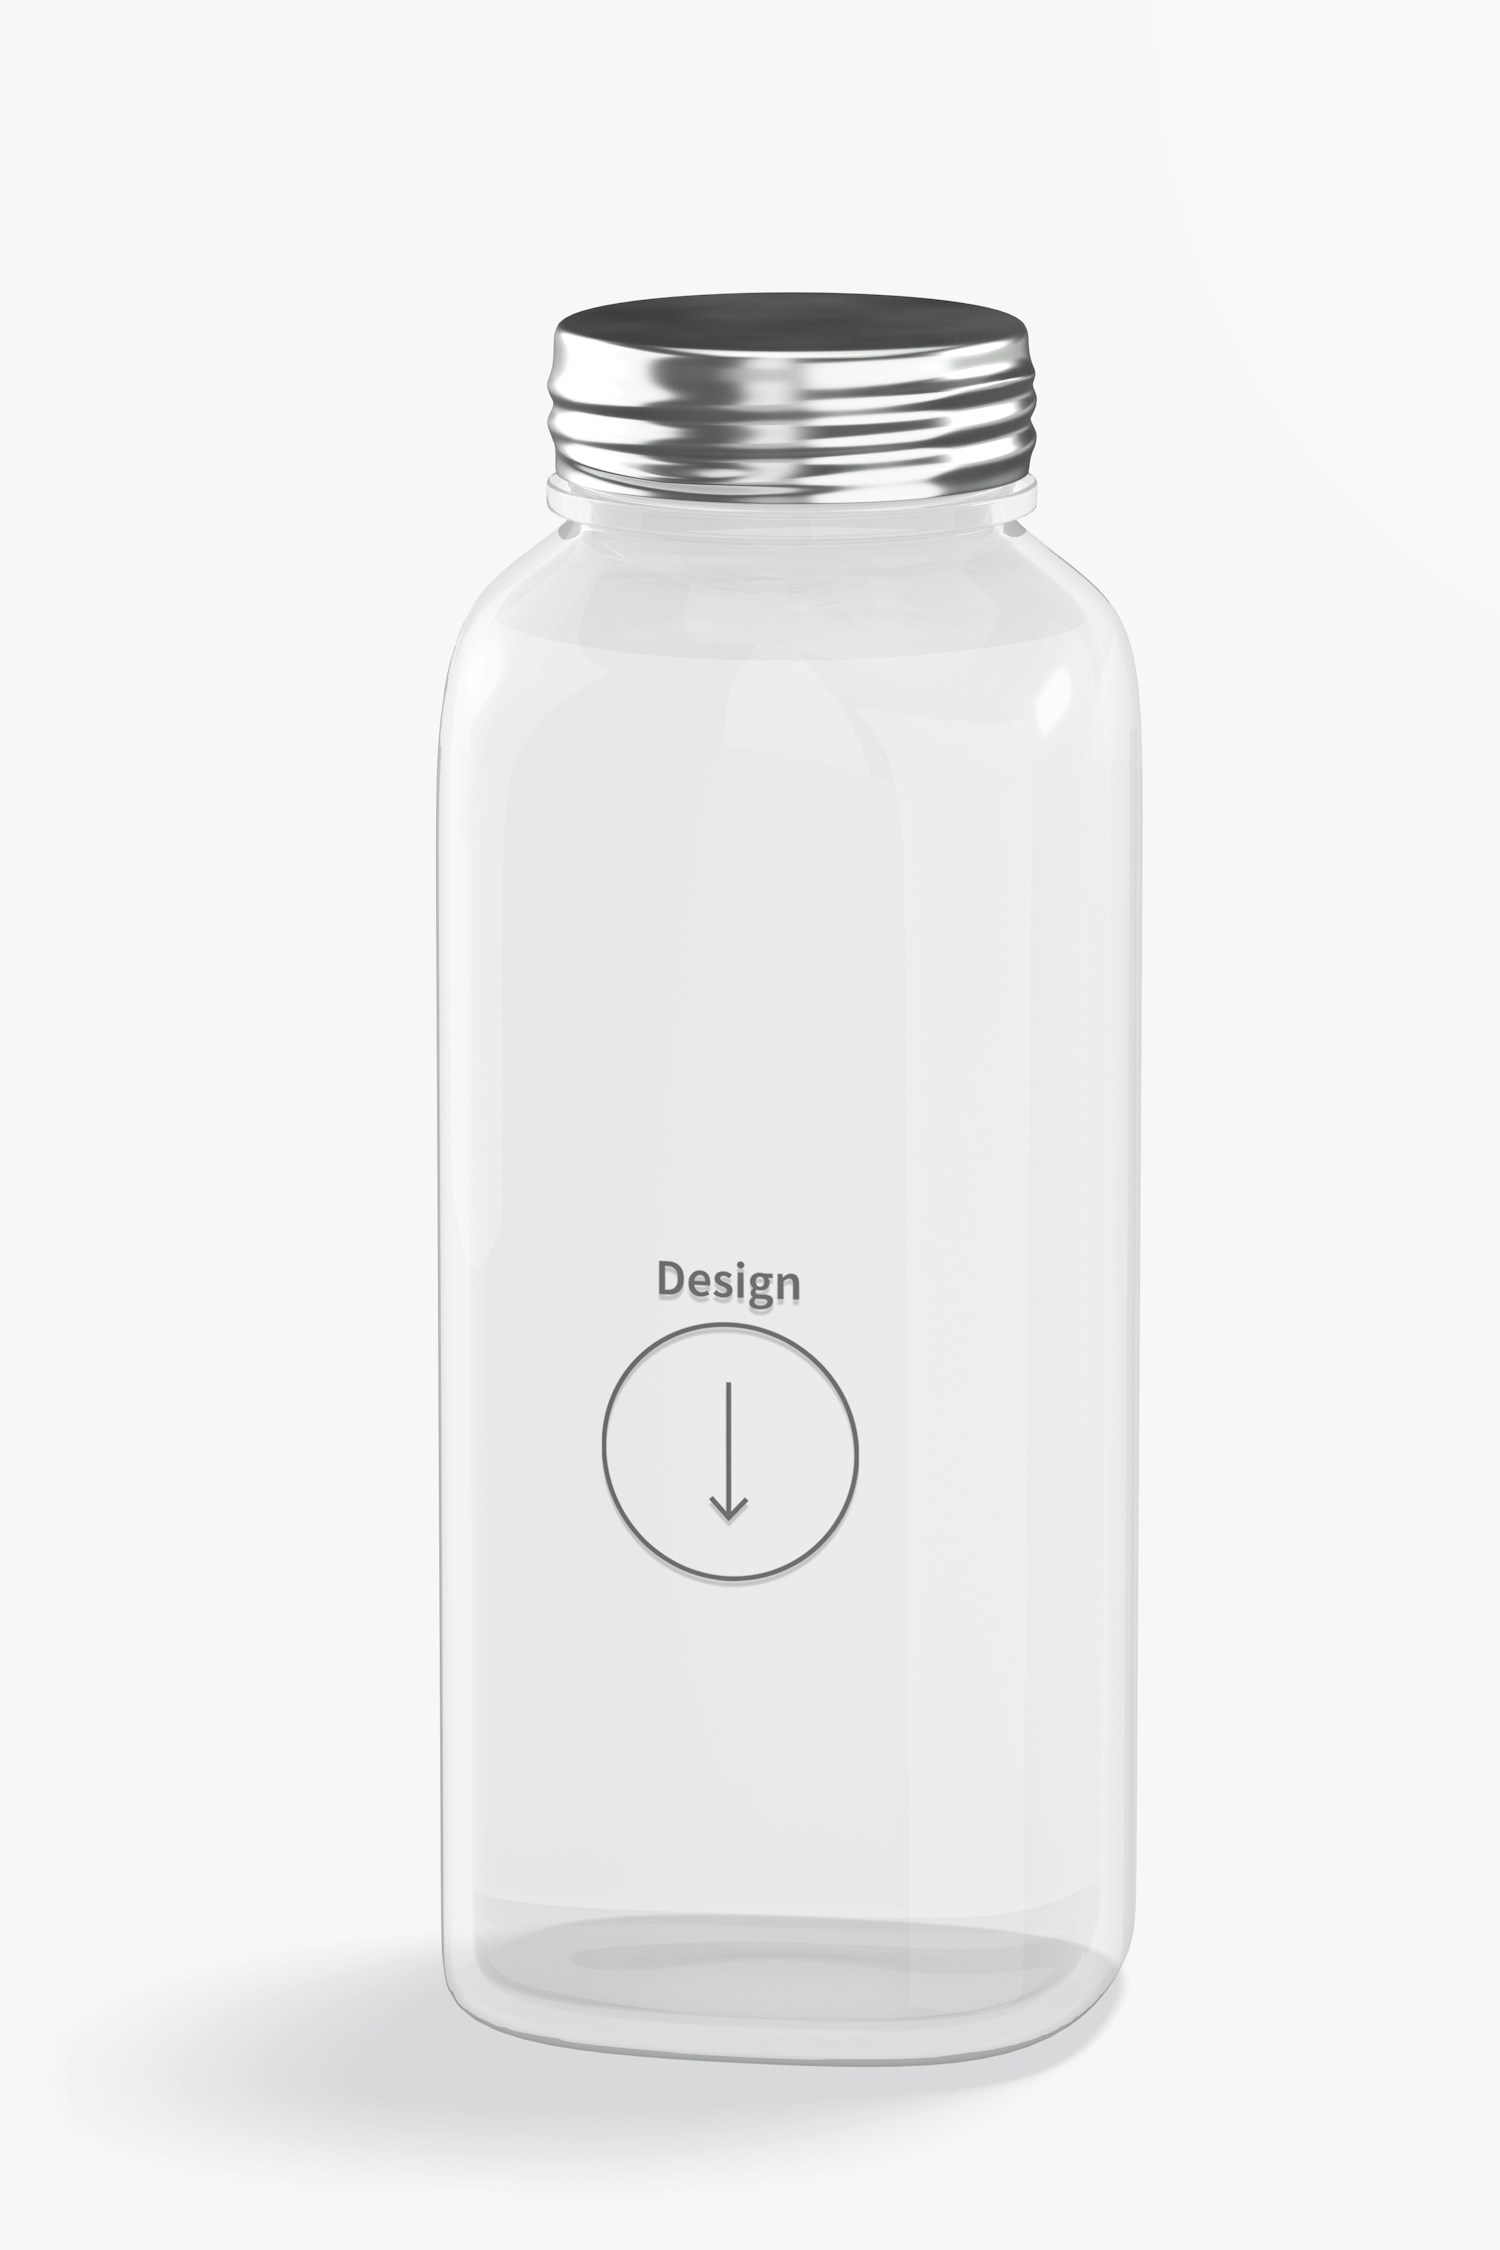 12 oz Glass Bottle Mockup, Front View